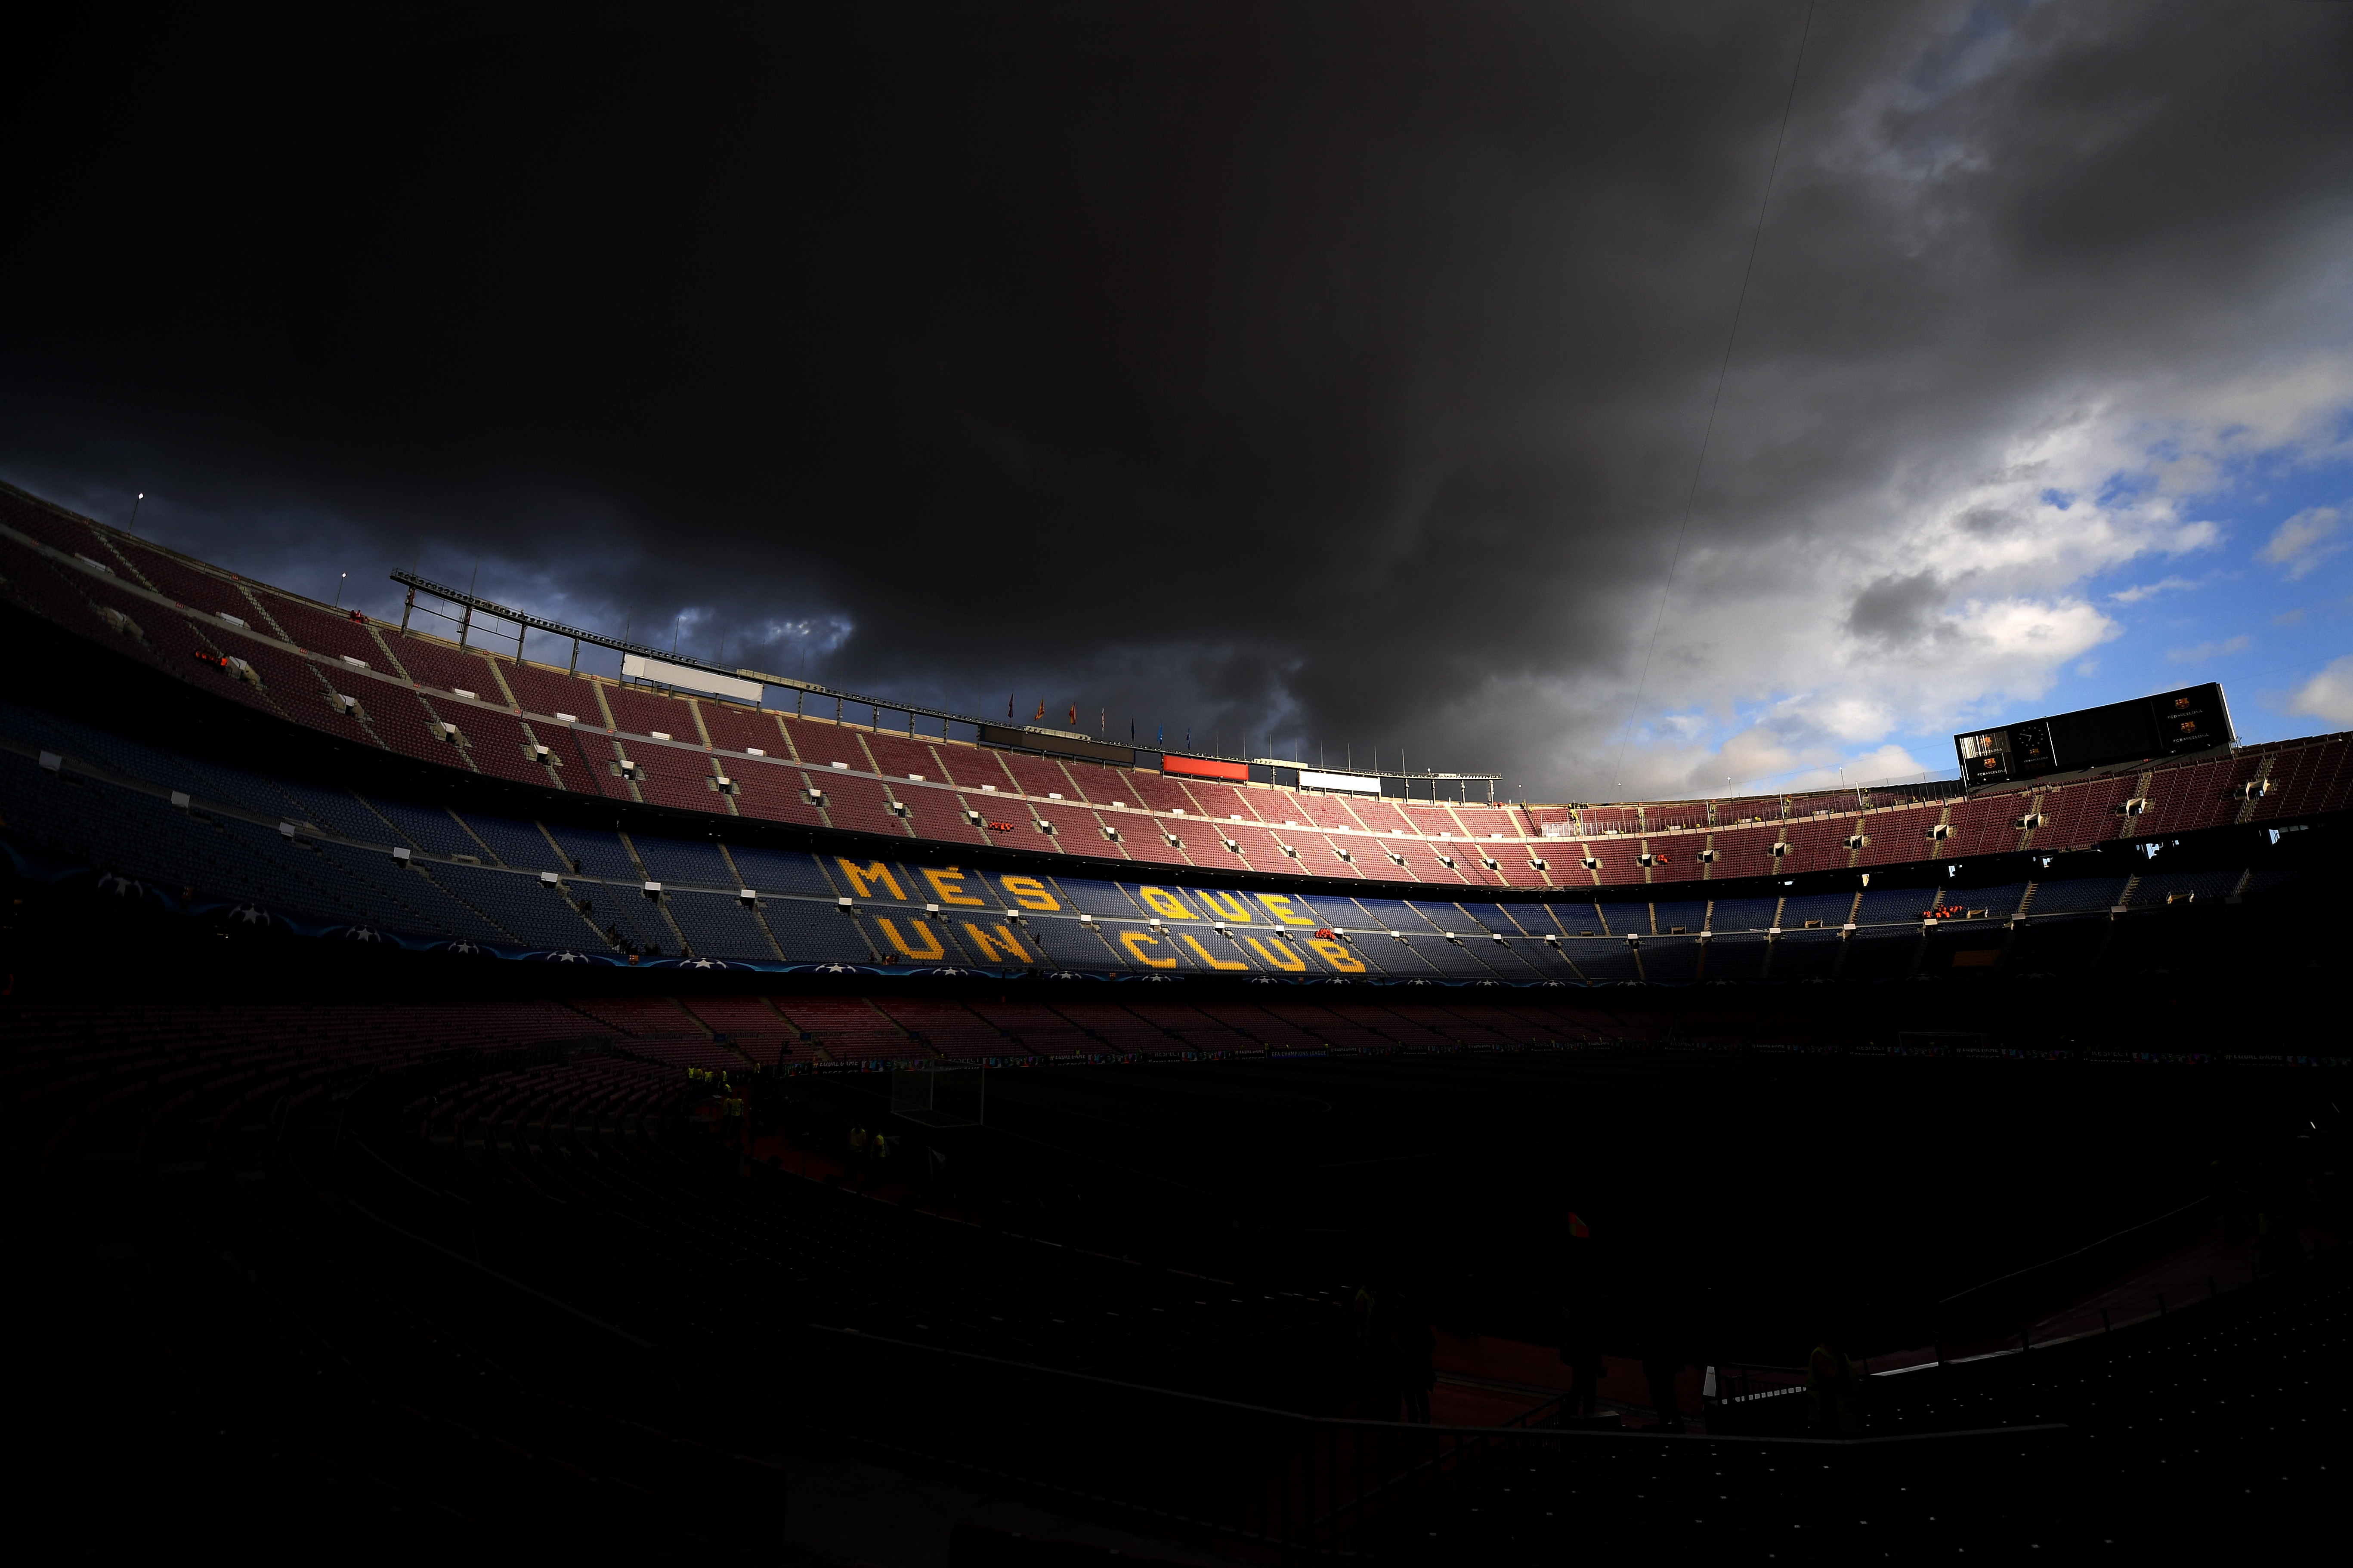 BARCELONA, SPAIN - SEPTEMBER 12:  A general view of the Camp Nou ahead of the UEFA Champions League Group D match between FC Barcelona and Juventus at Camp Nou on September 12, 2017 in Barcelona, Spain.  (Photo by David Ramos/Getty Images)